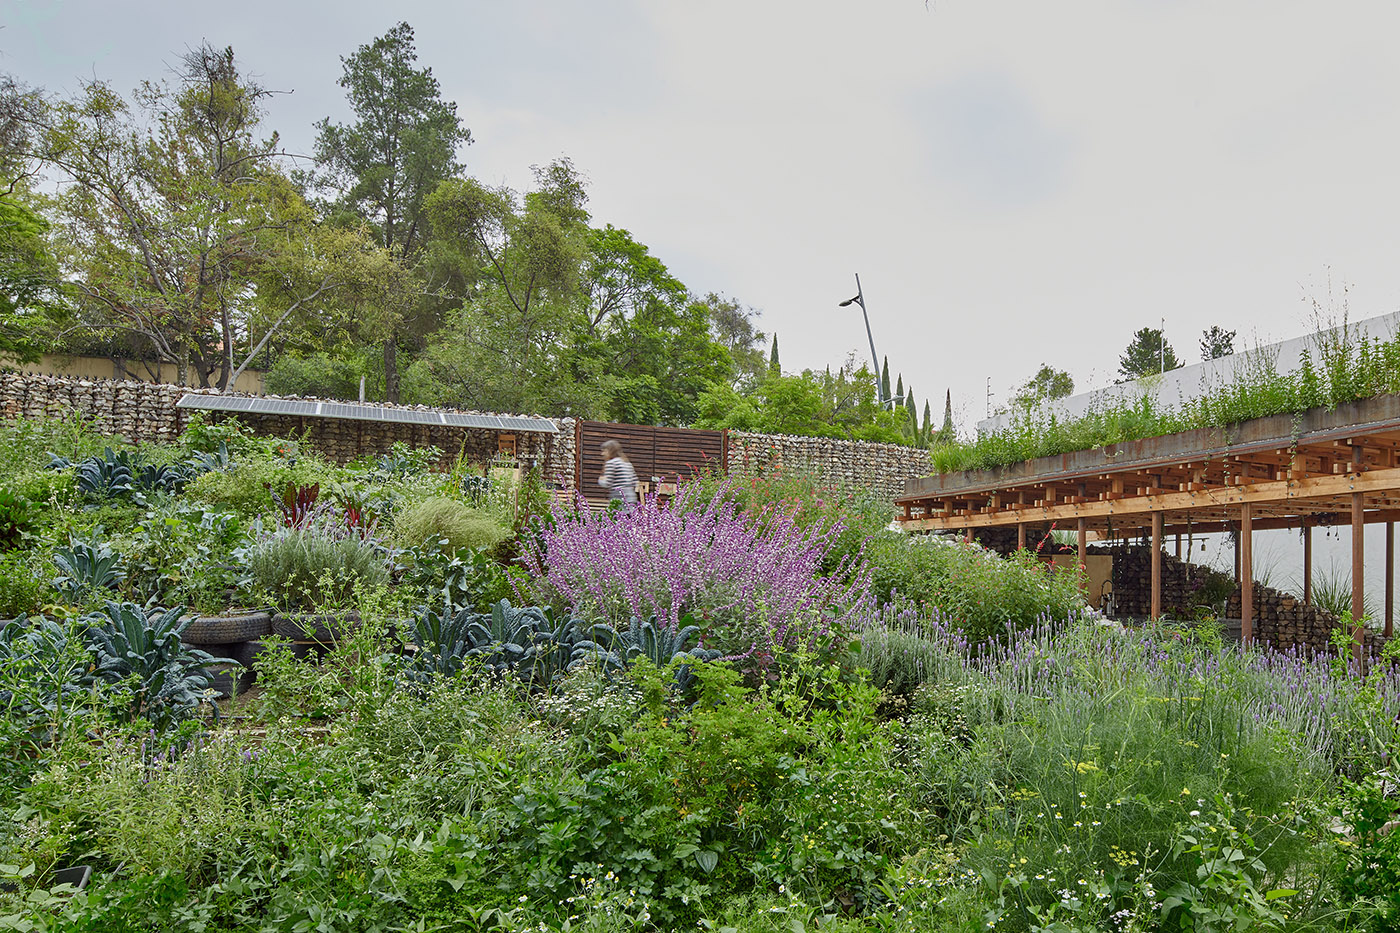 El Terreno. An urban garden designed as an area in order to educate about environmental sustainability